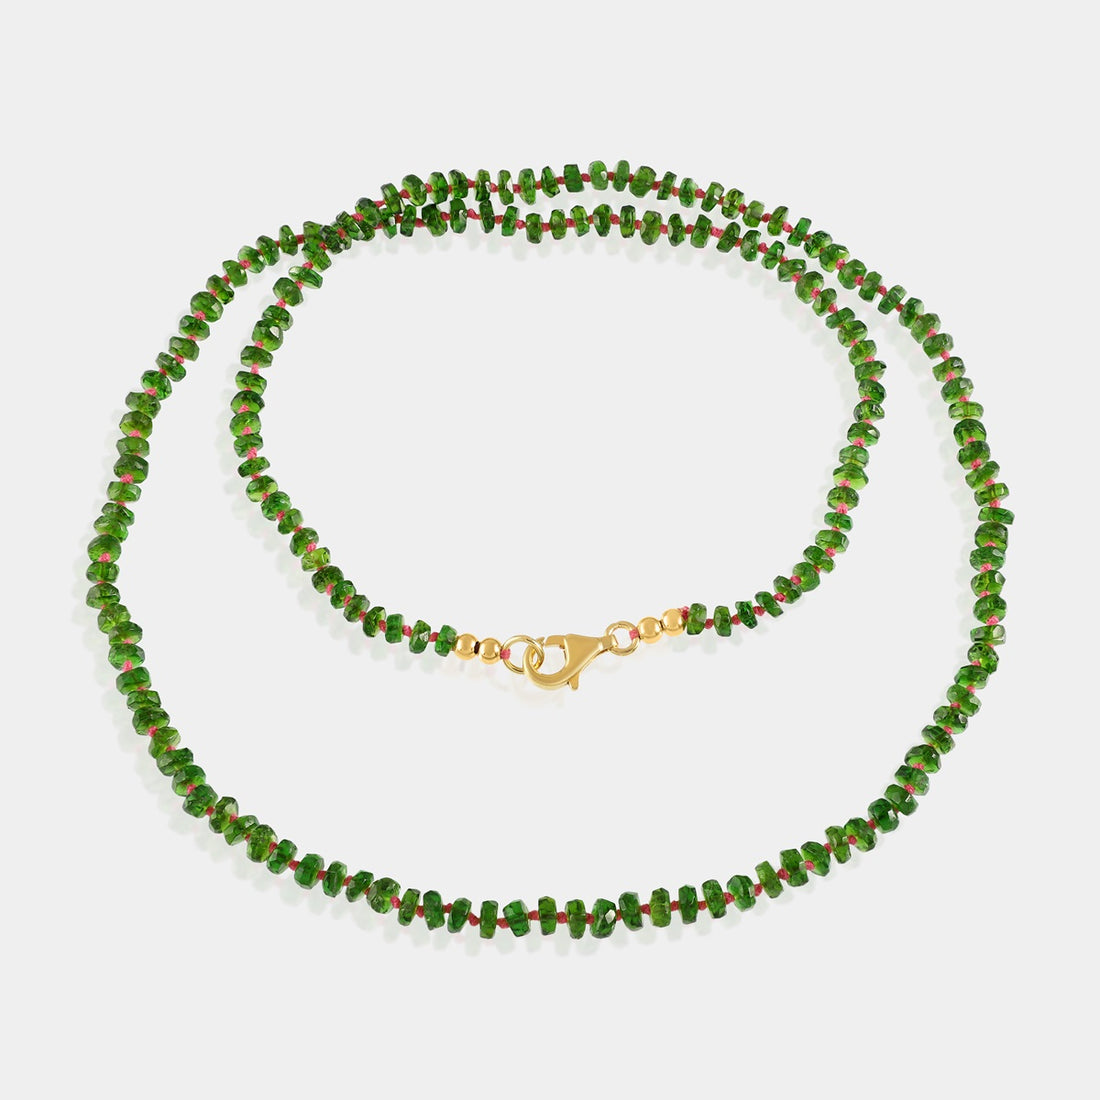 Intricately knotted thread securing Chrome Diopside gemstone beads